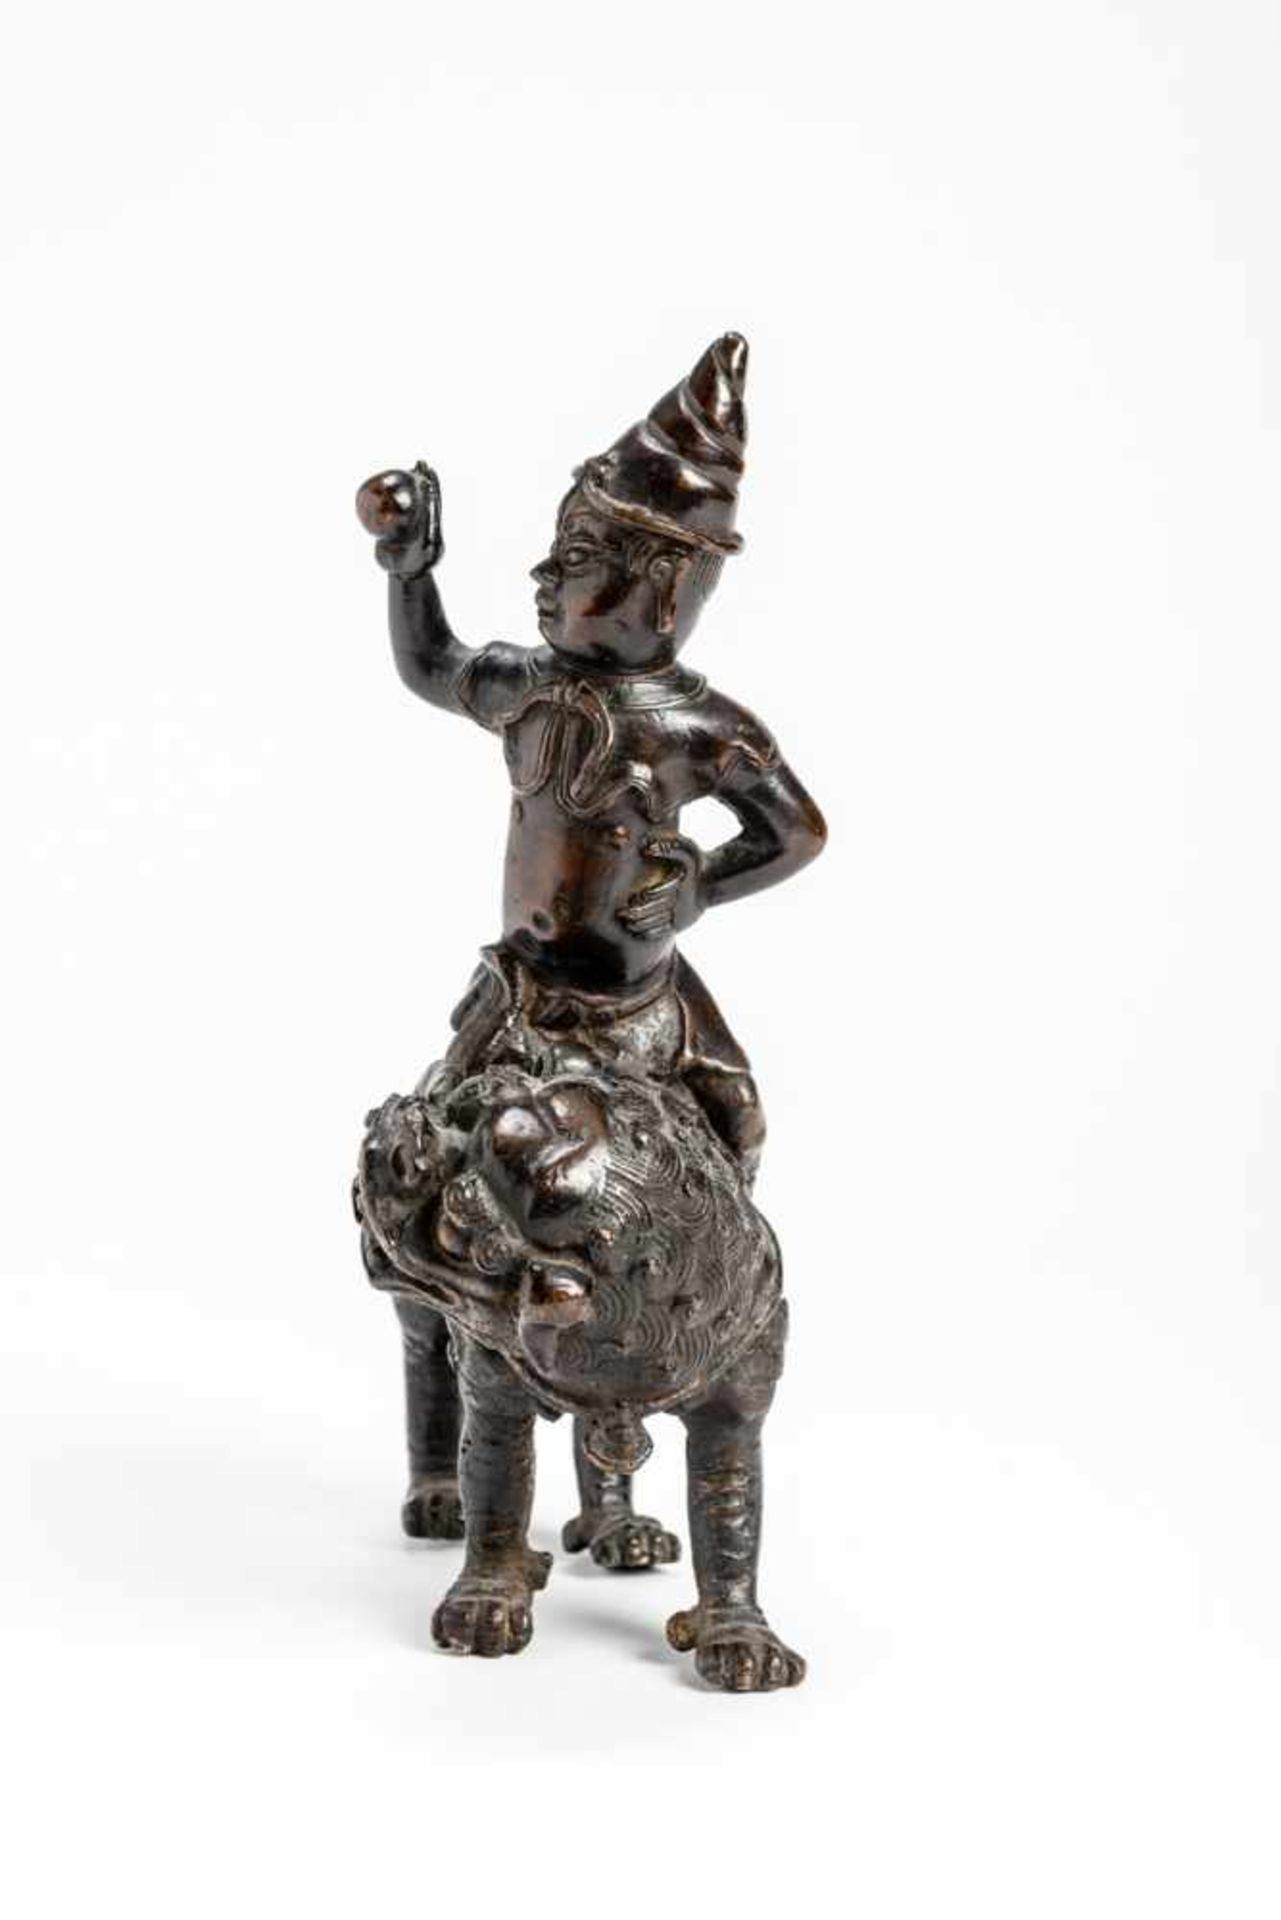 A BRONZE GUARDIAN DEITY RIDING ON A LION - Image 6 of 7